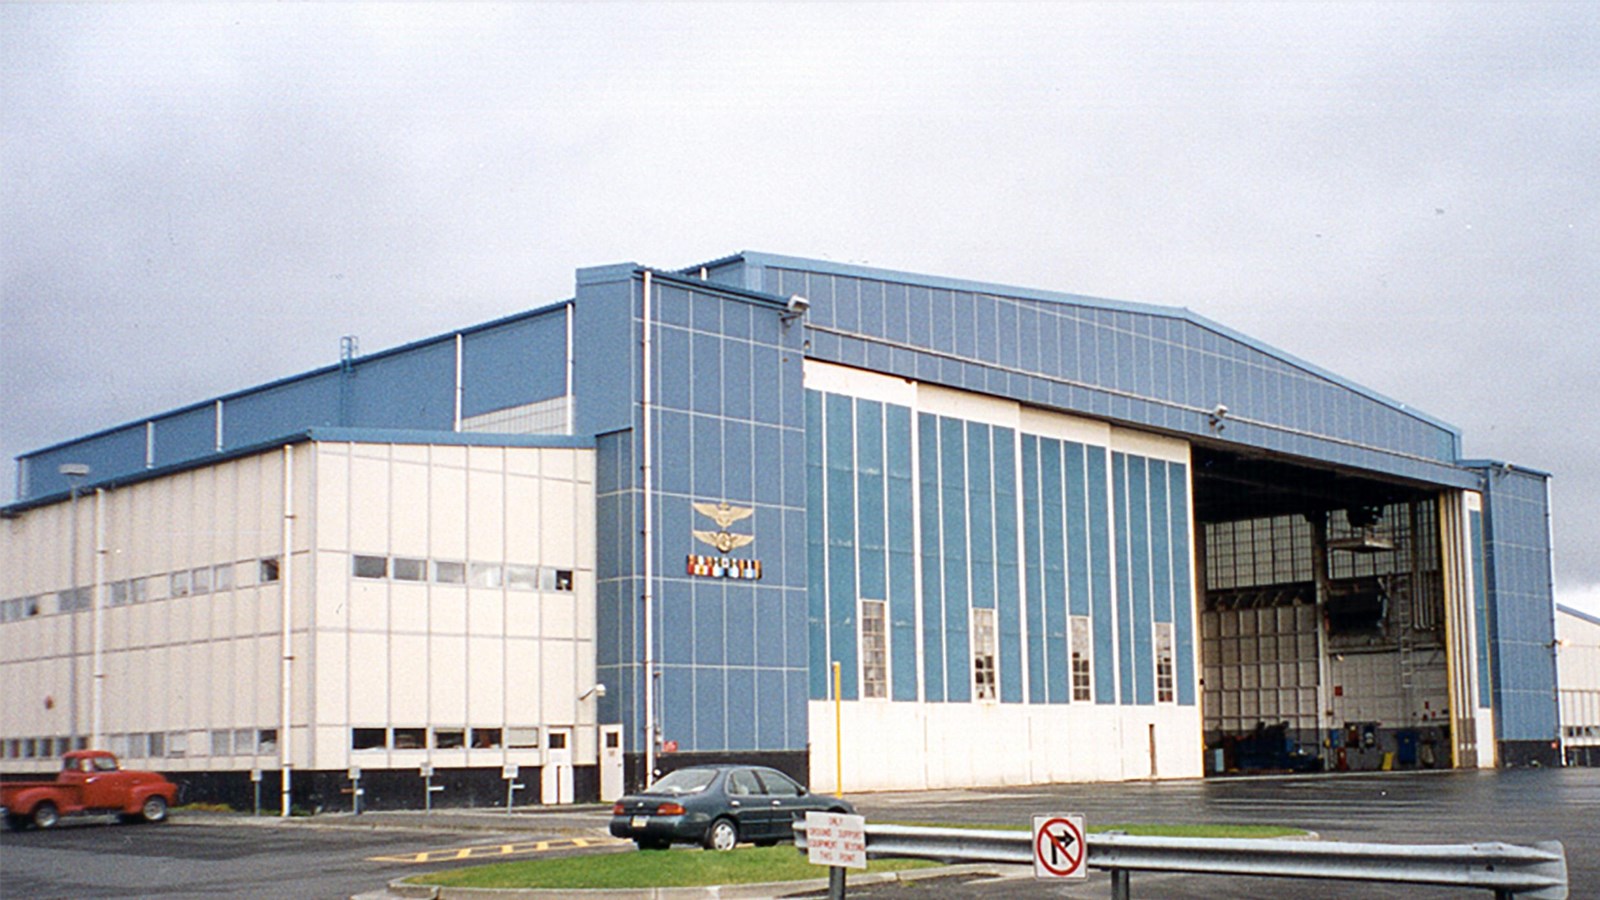 A large blue and white airplane hangar with with its door open.